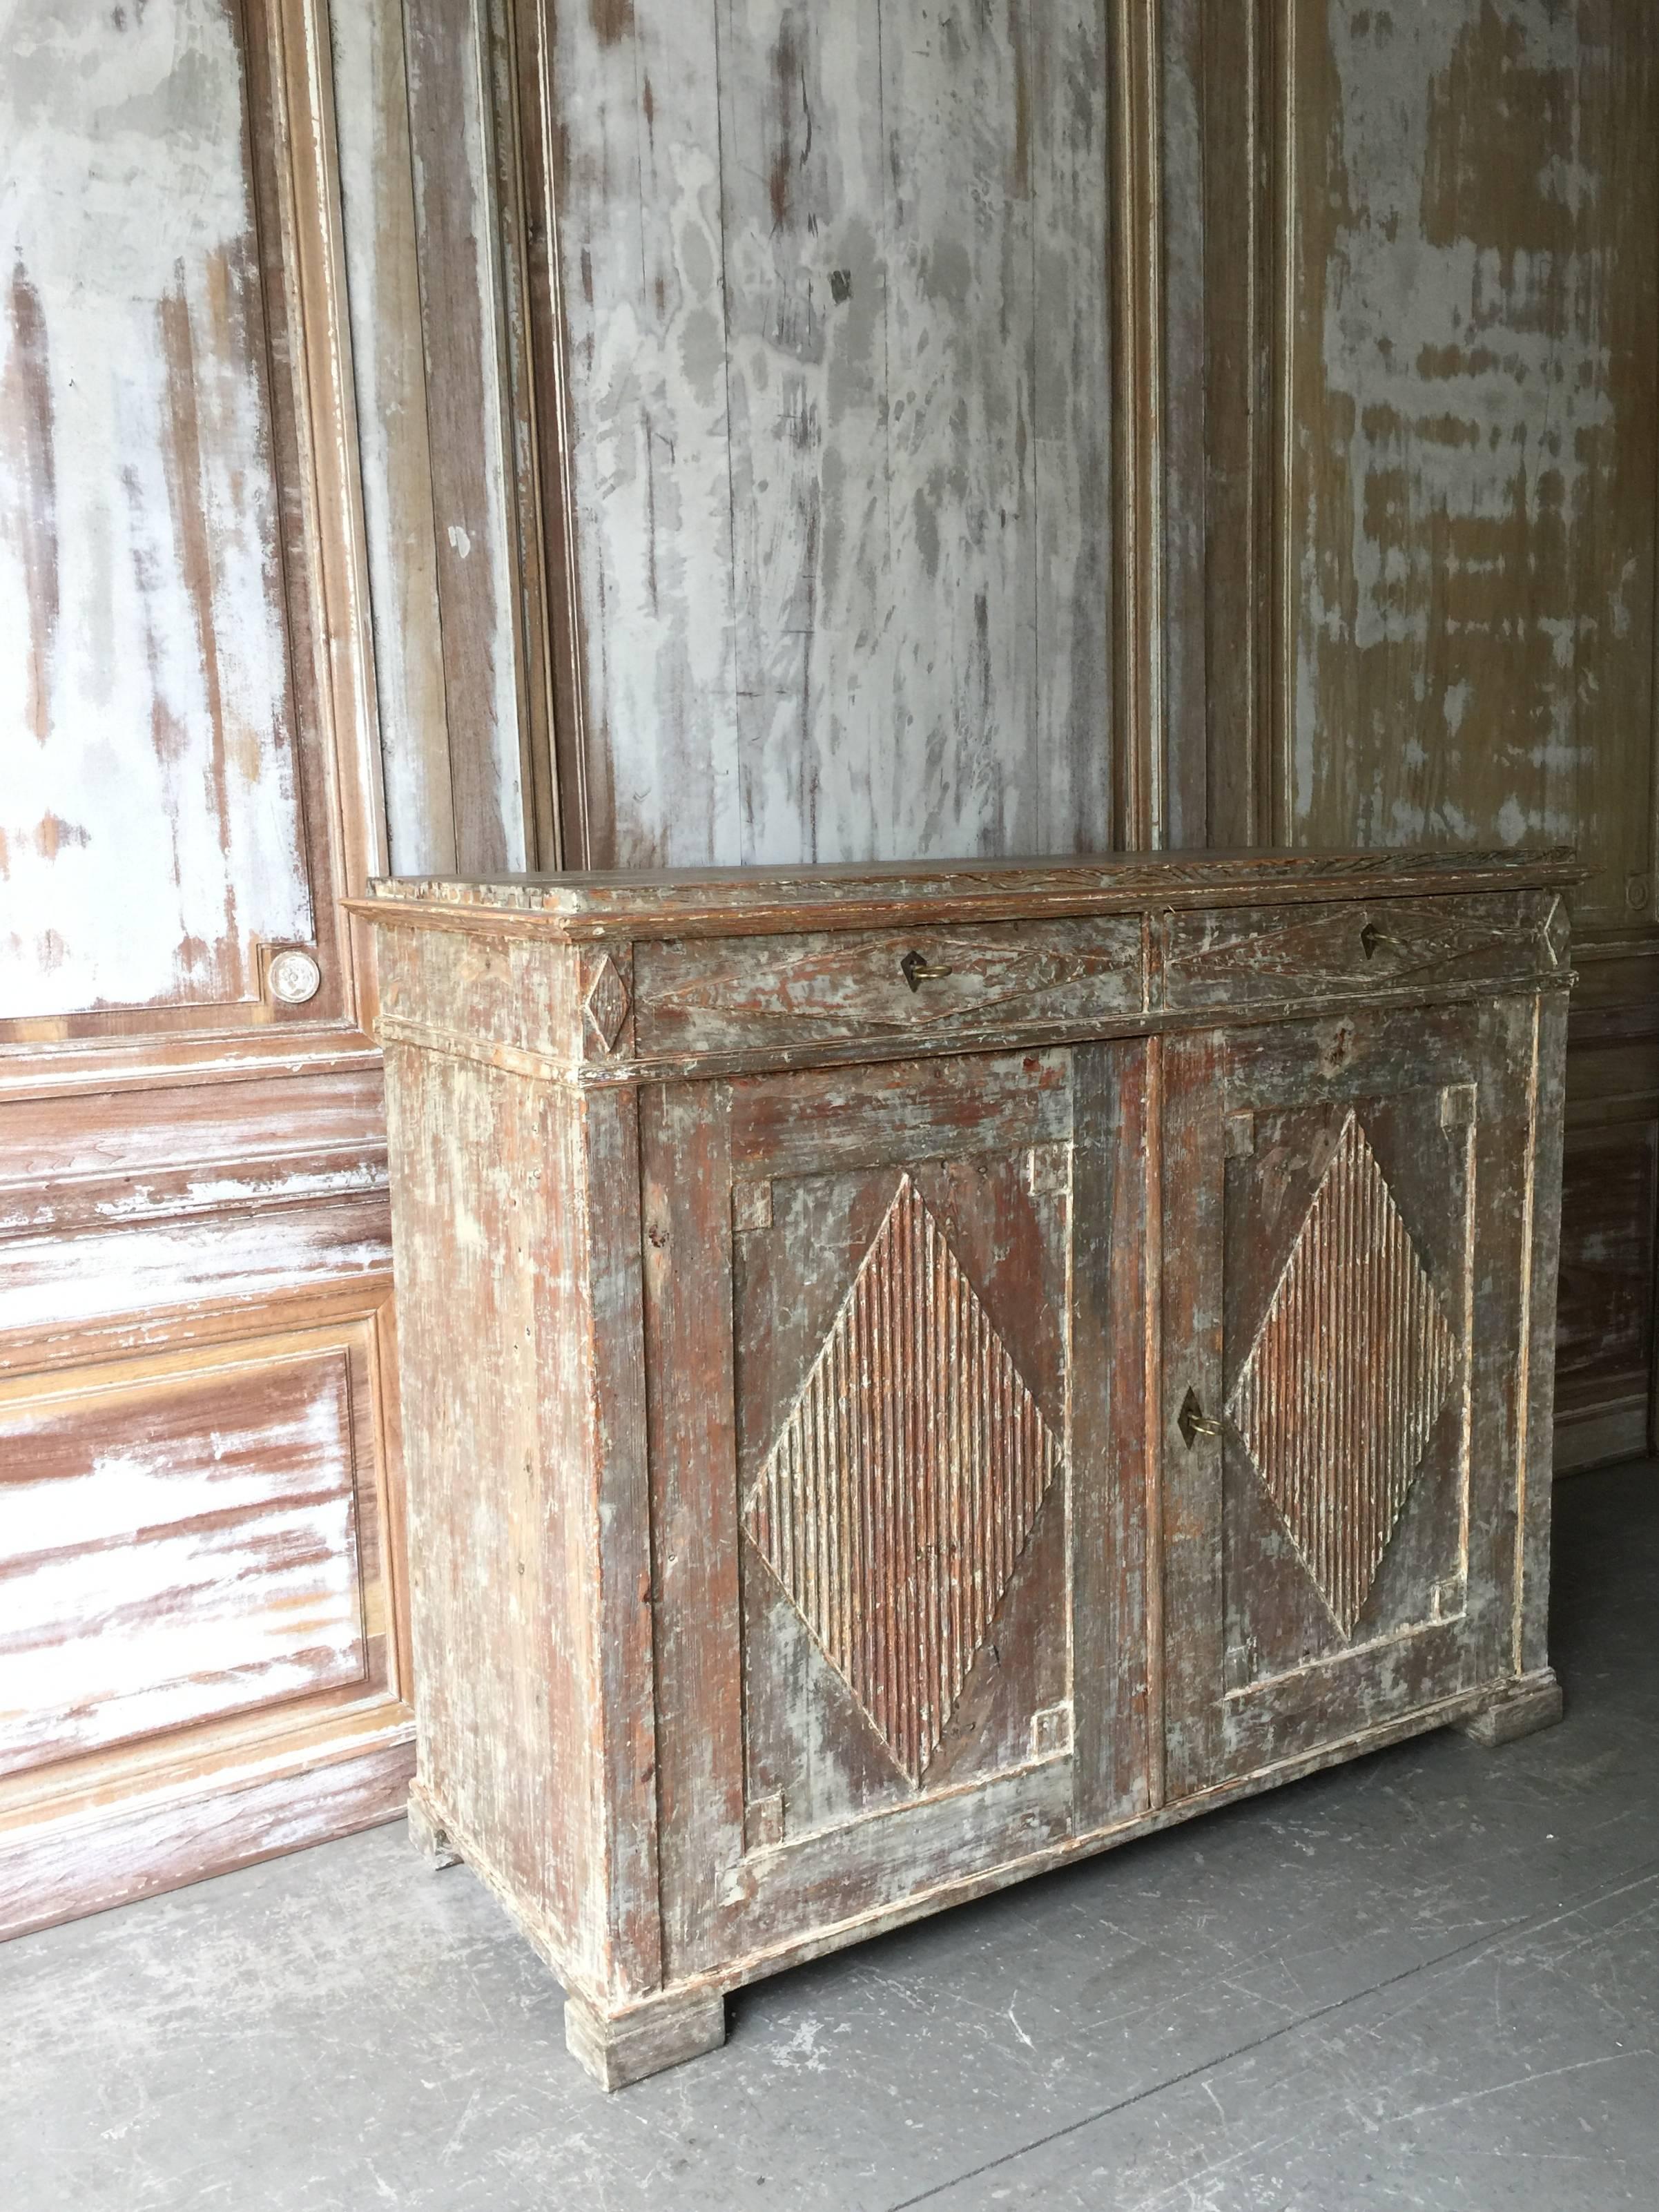 Swedish period Gustavian sideboard with shaped top, in Classic Gustavian Style with diamond chapped reeded doors scraped back to original color.
Värmland, Sweden, circa 1810/1820.

More than ever, we selected the best, the rarest, the unusual,